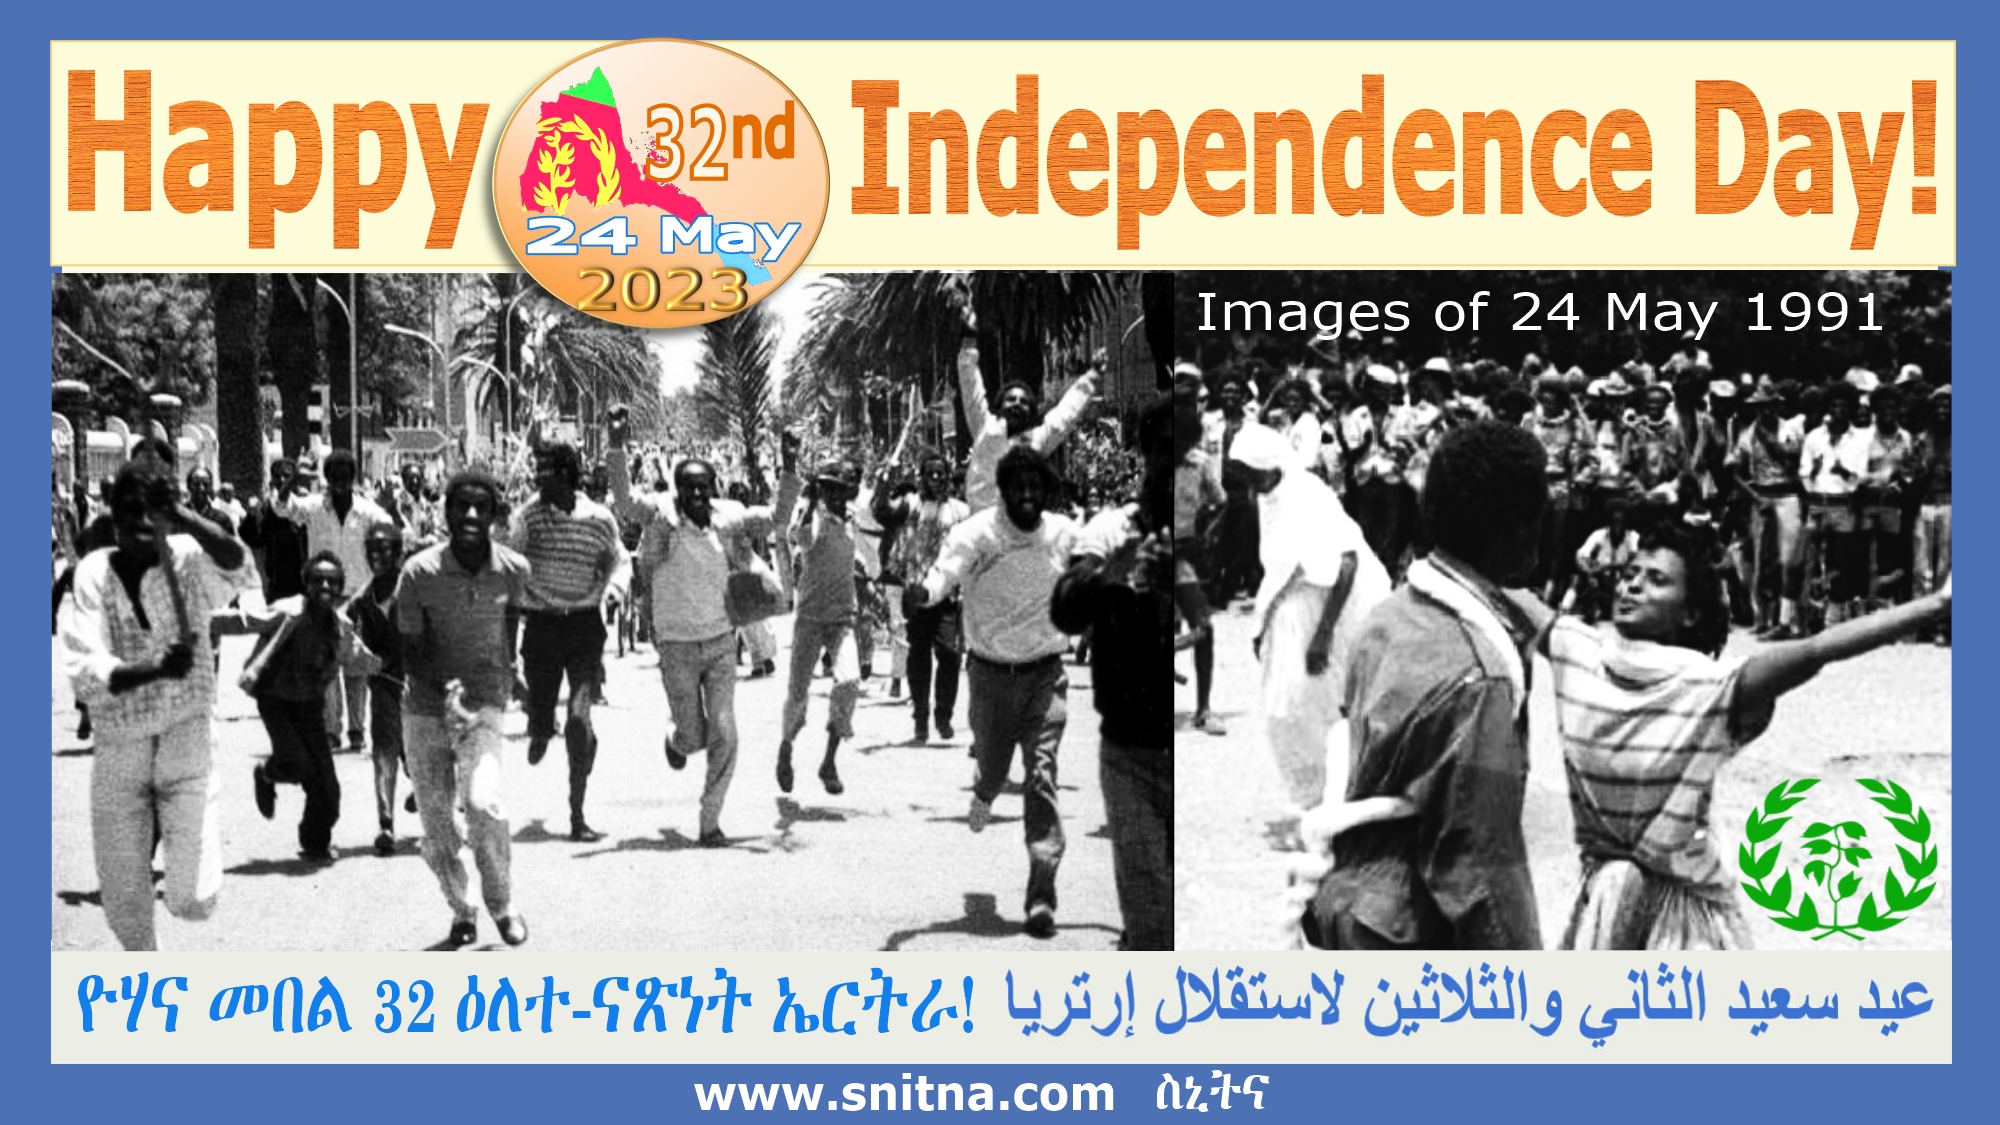 Memories and Reflections on the occasion of the 32nd Eritrea's Independence Day.